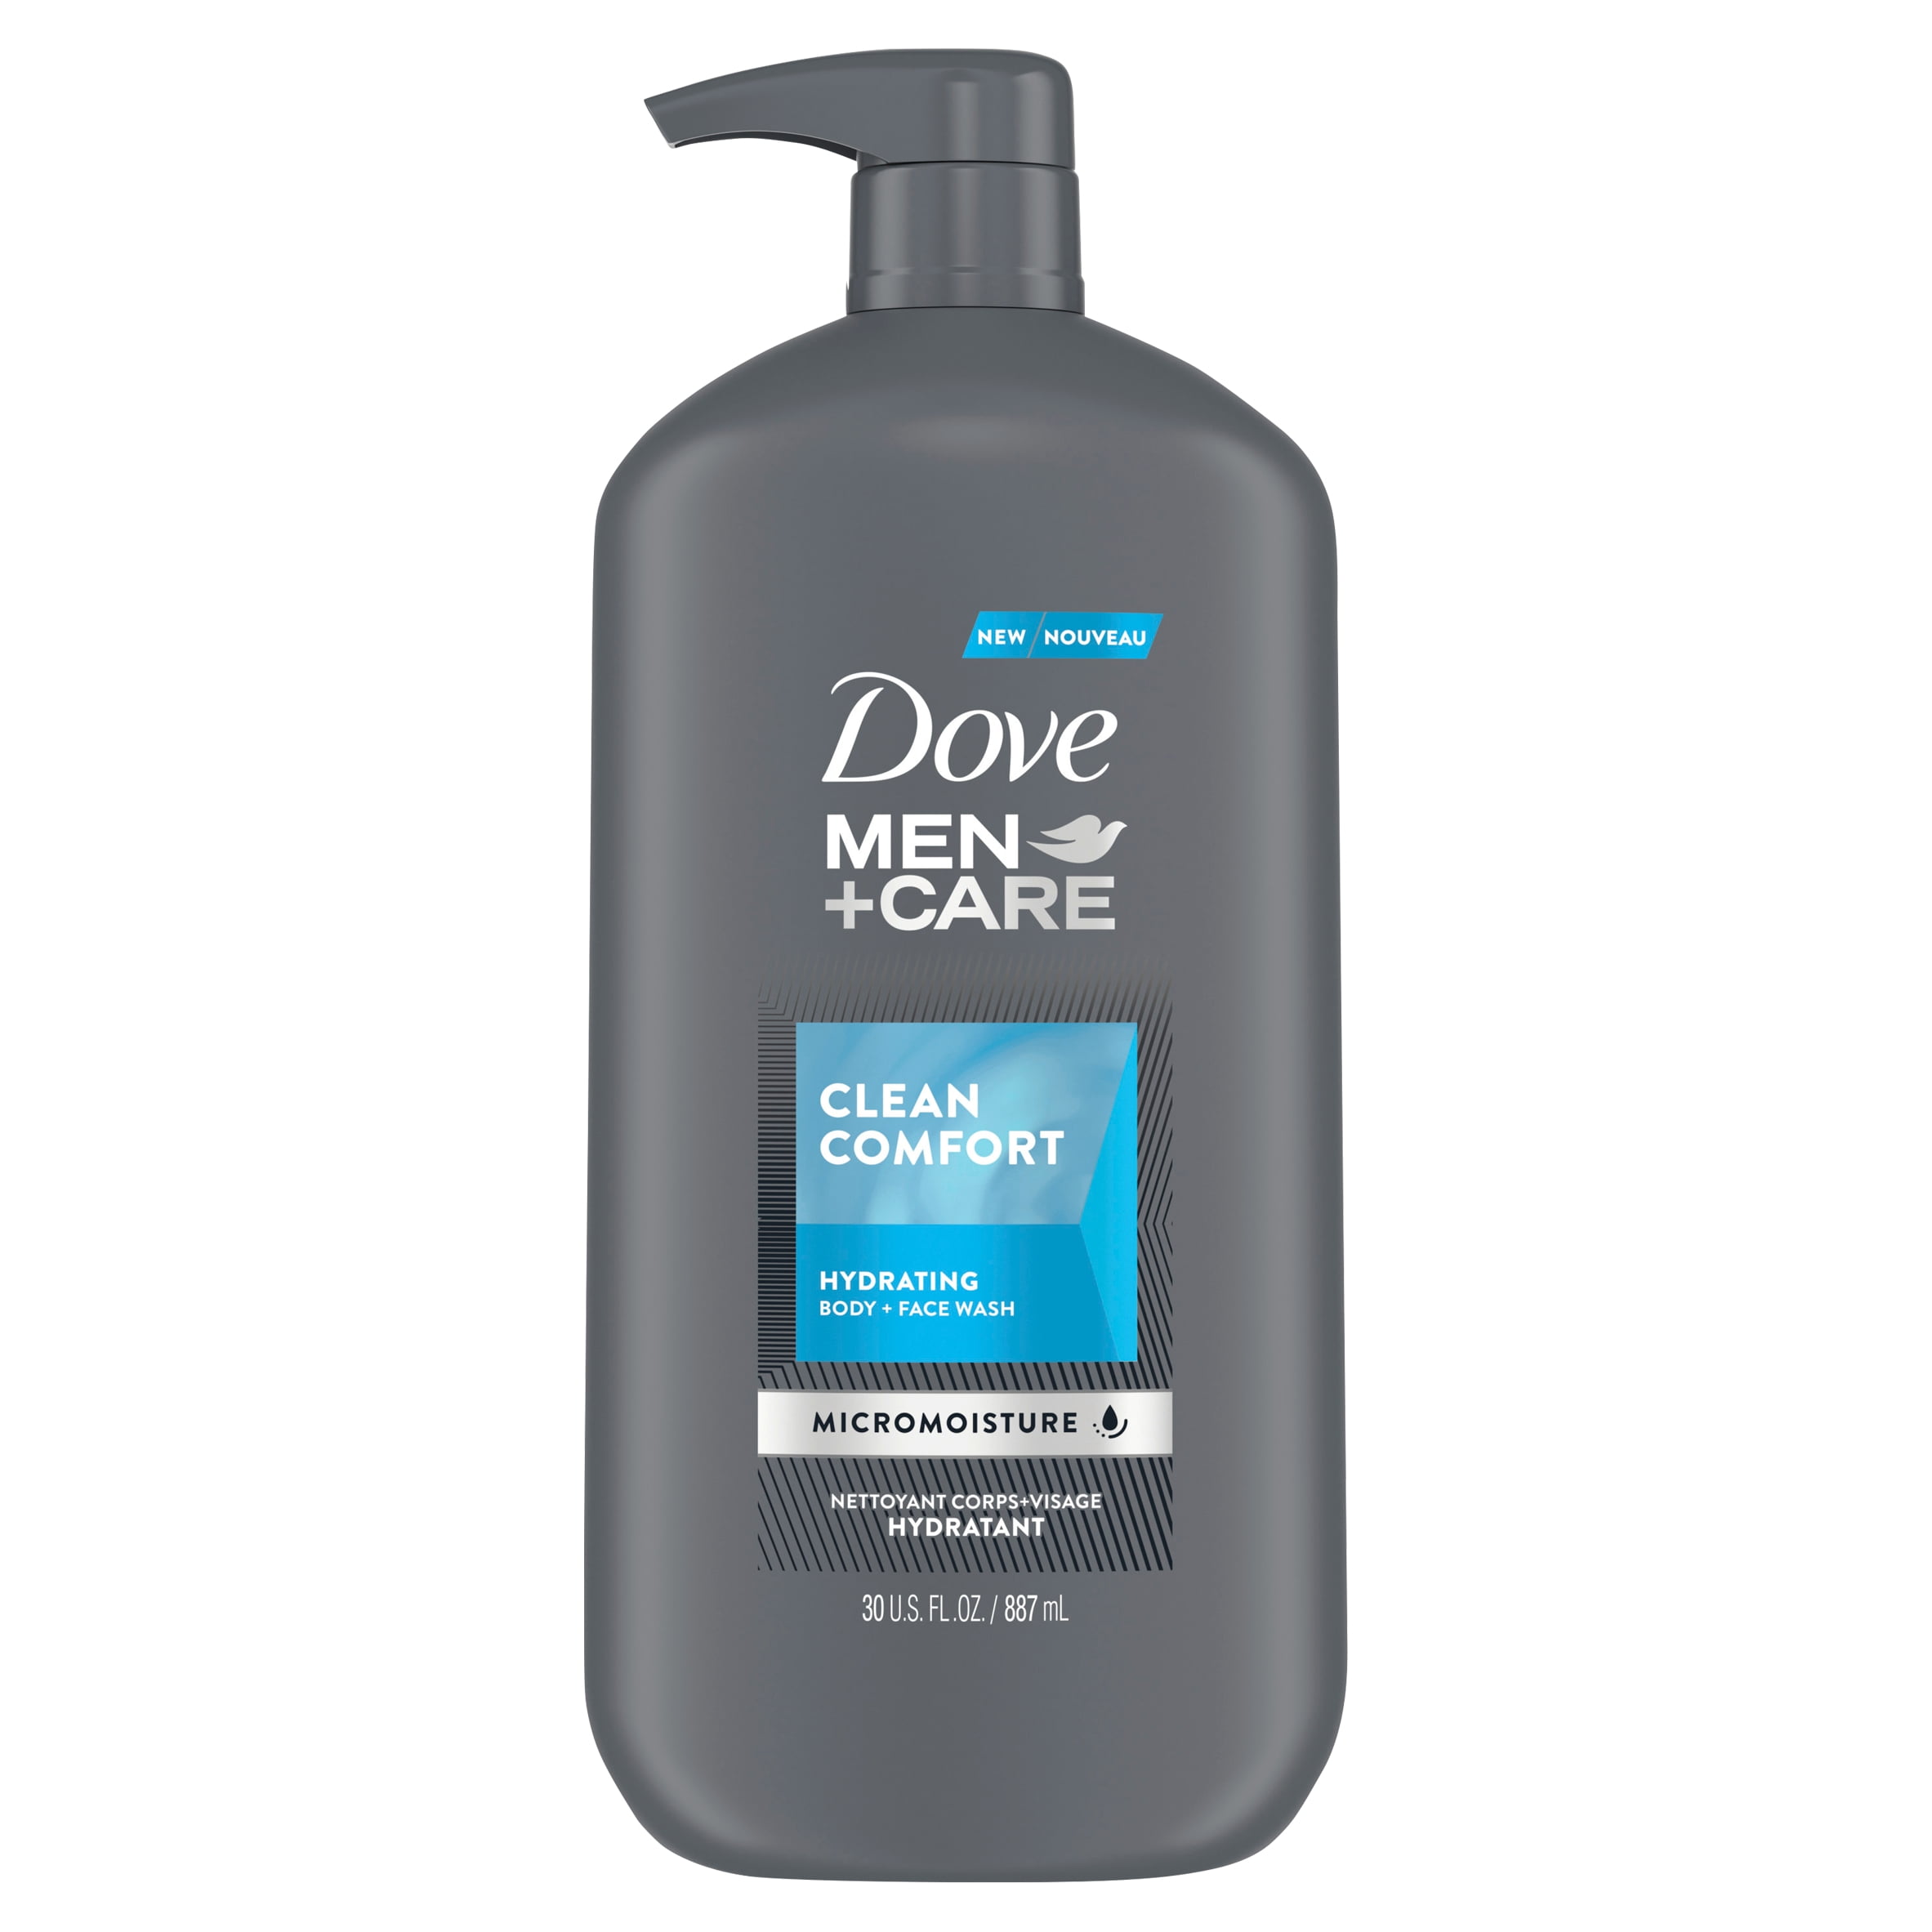 Dove Men+Care Body Wash and Face Wash Comfort 30 oz -